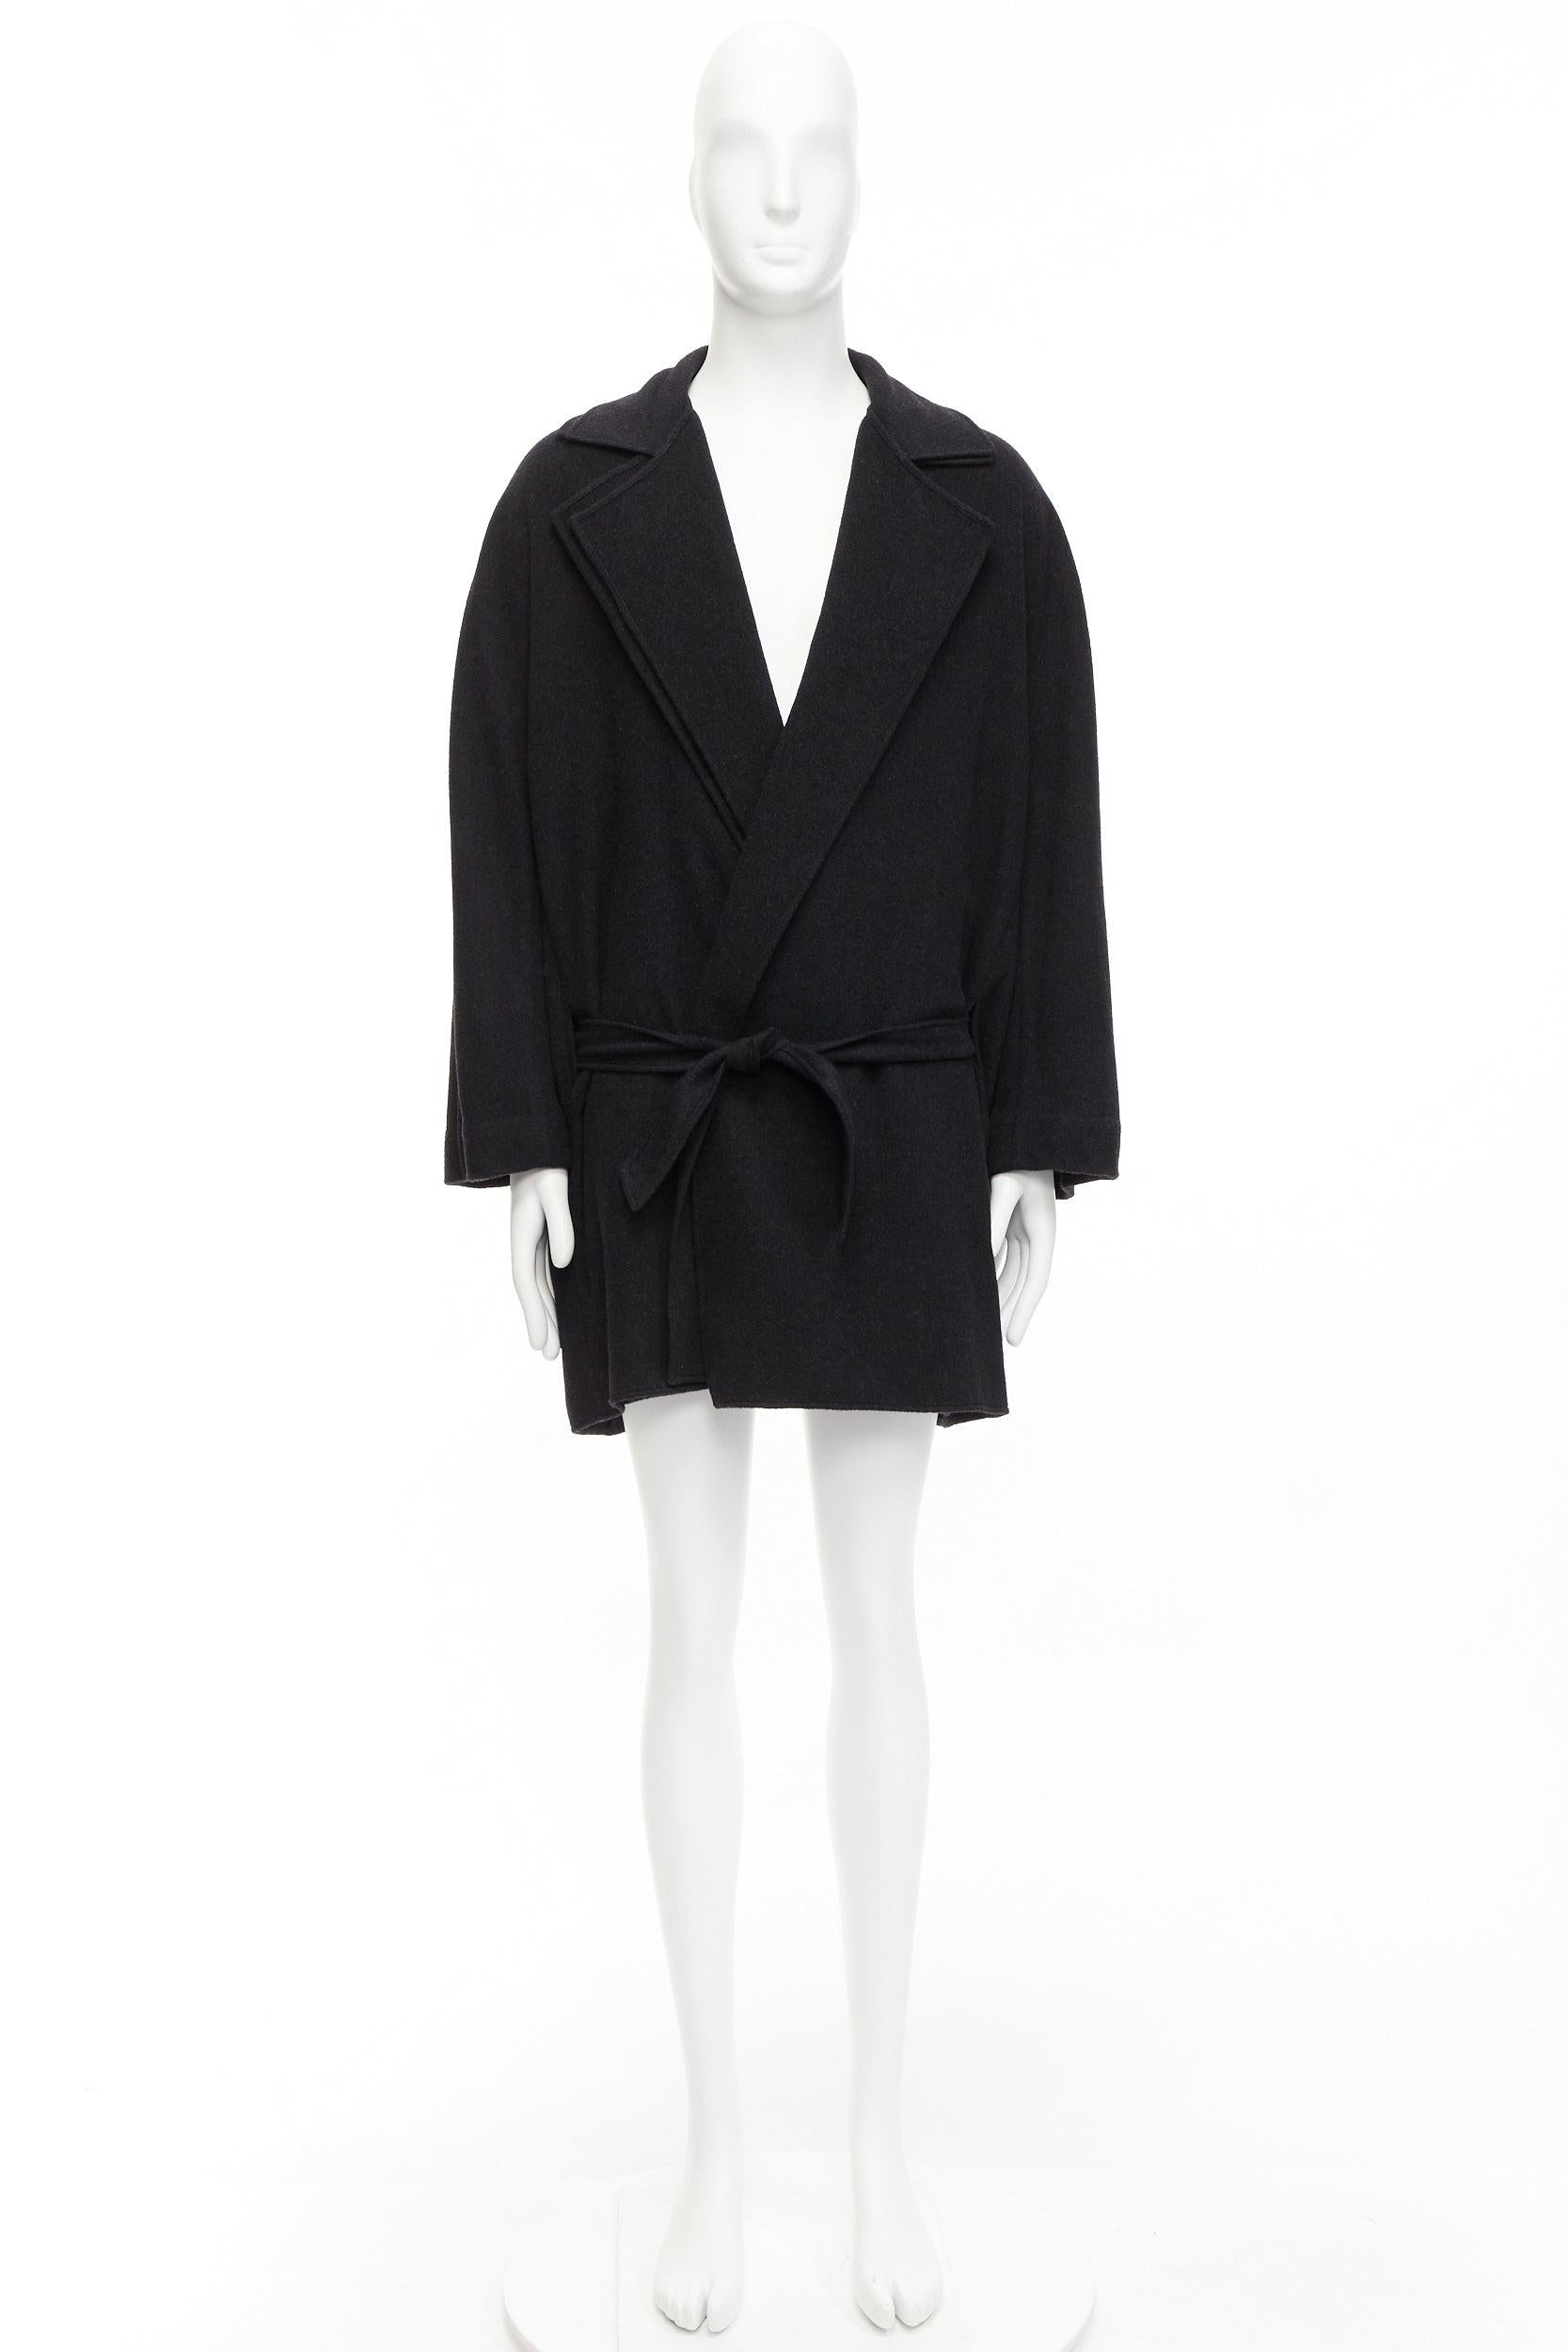 HERMES Vintage dark grey double faced cashmere dual collar belted robe coat EU48 For Sale 6